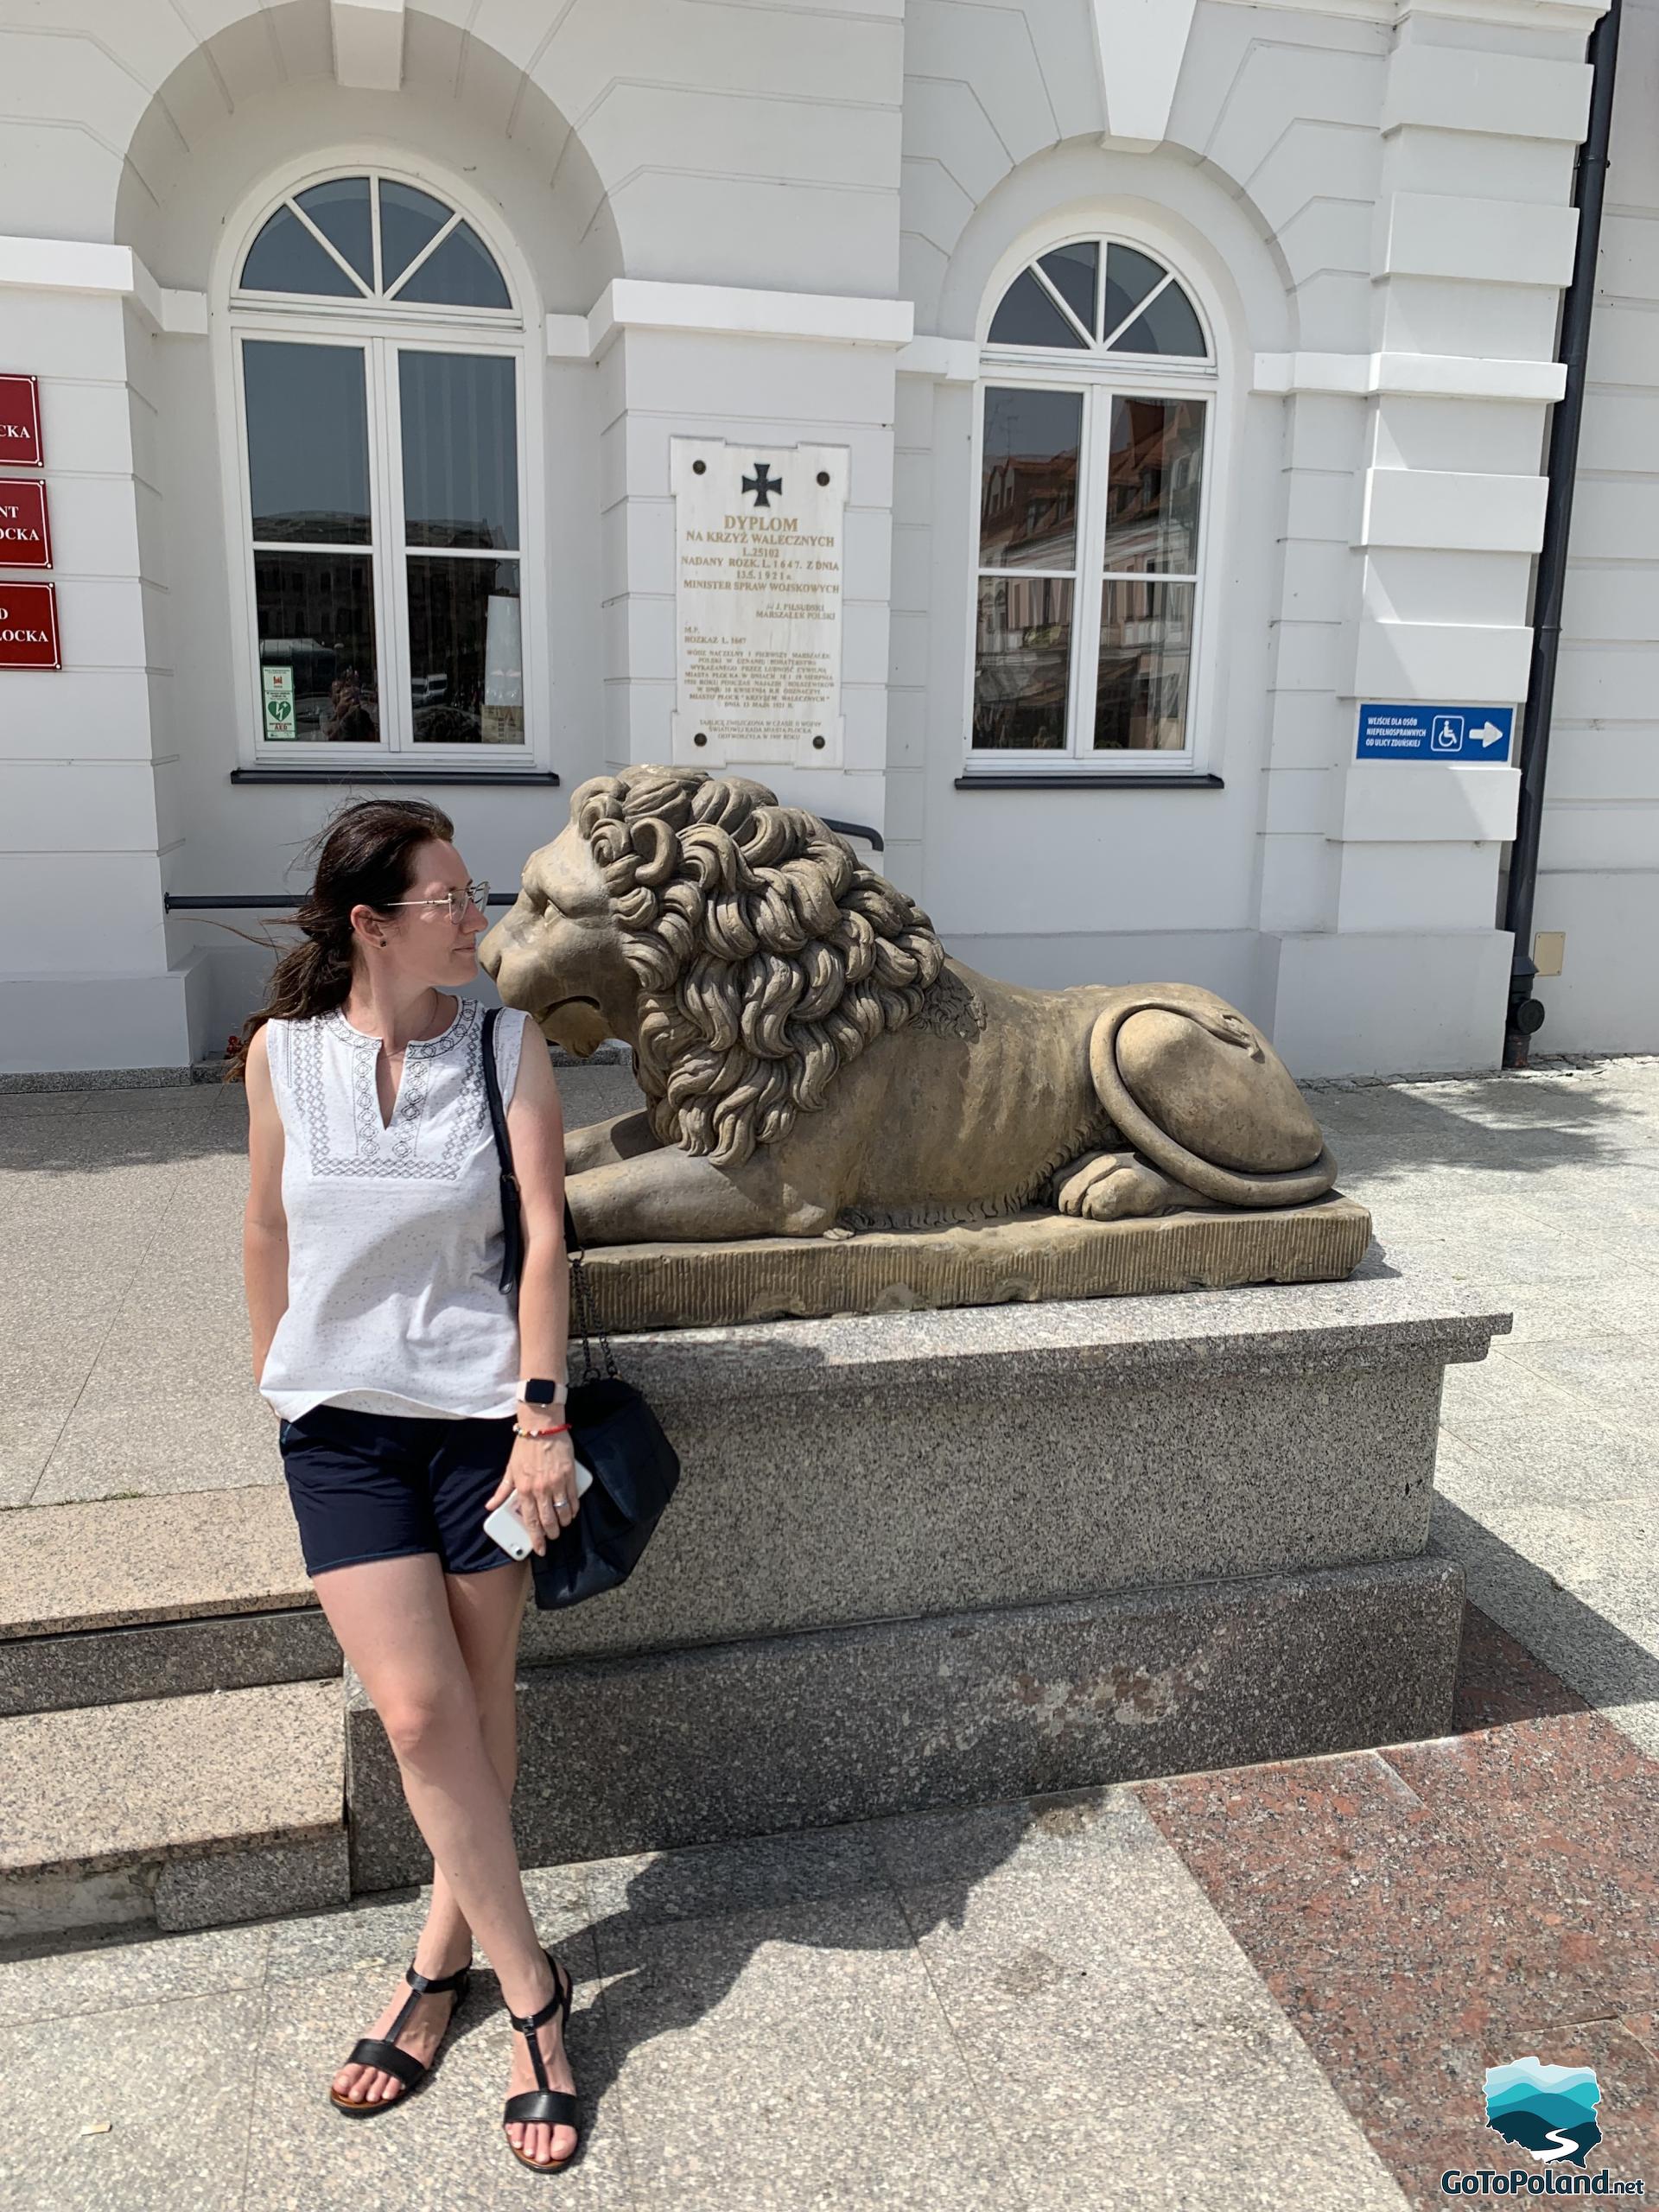 A woman standing by the lion sculpture, a lion is in front of the white building